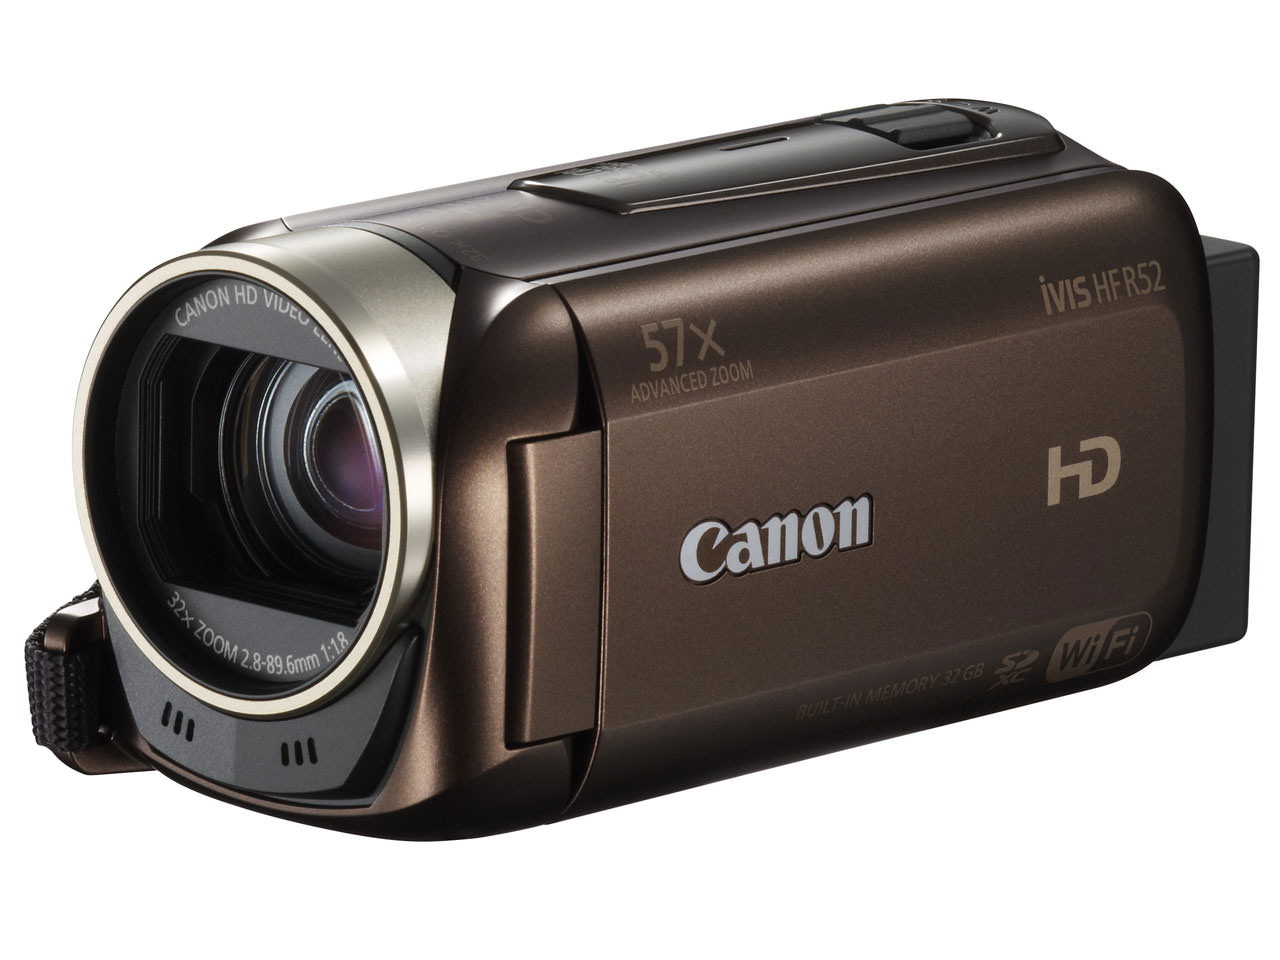 Canon iVIS HF R52